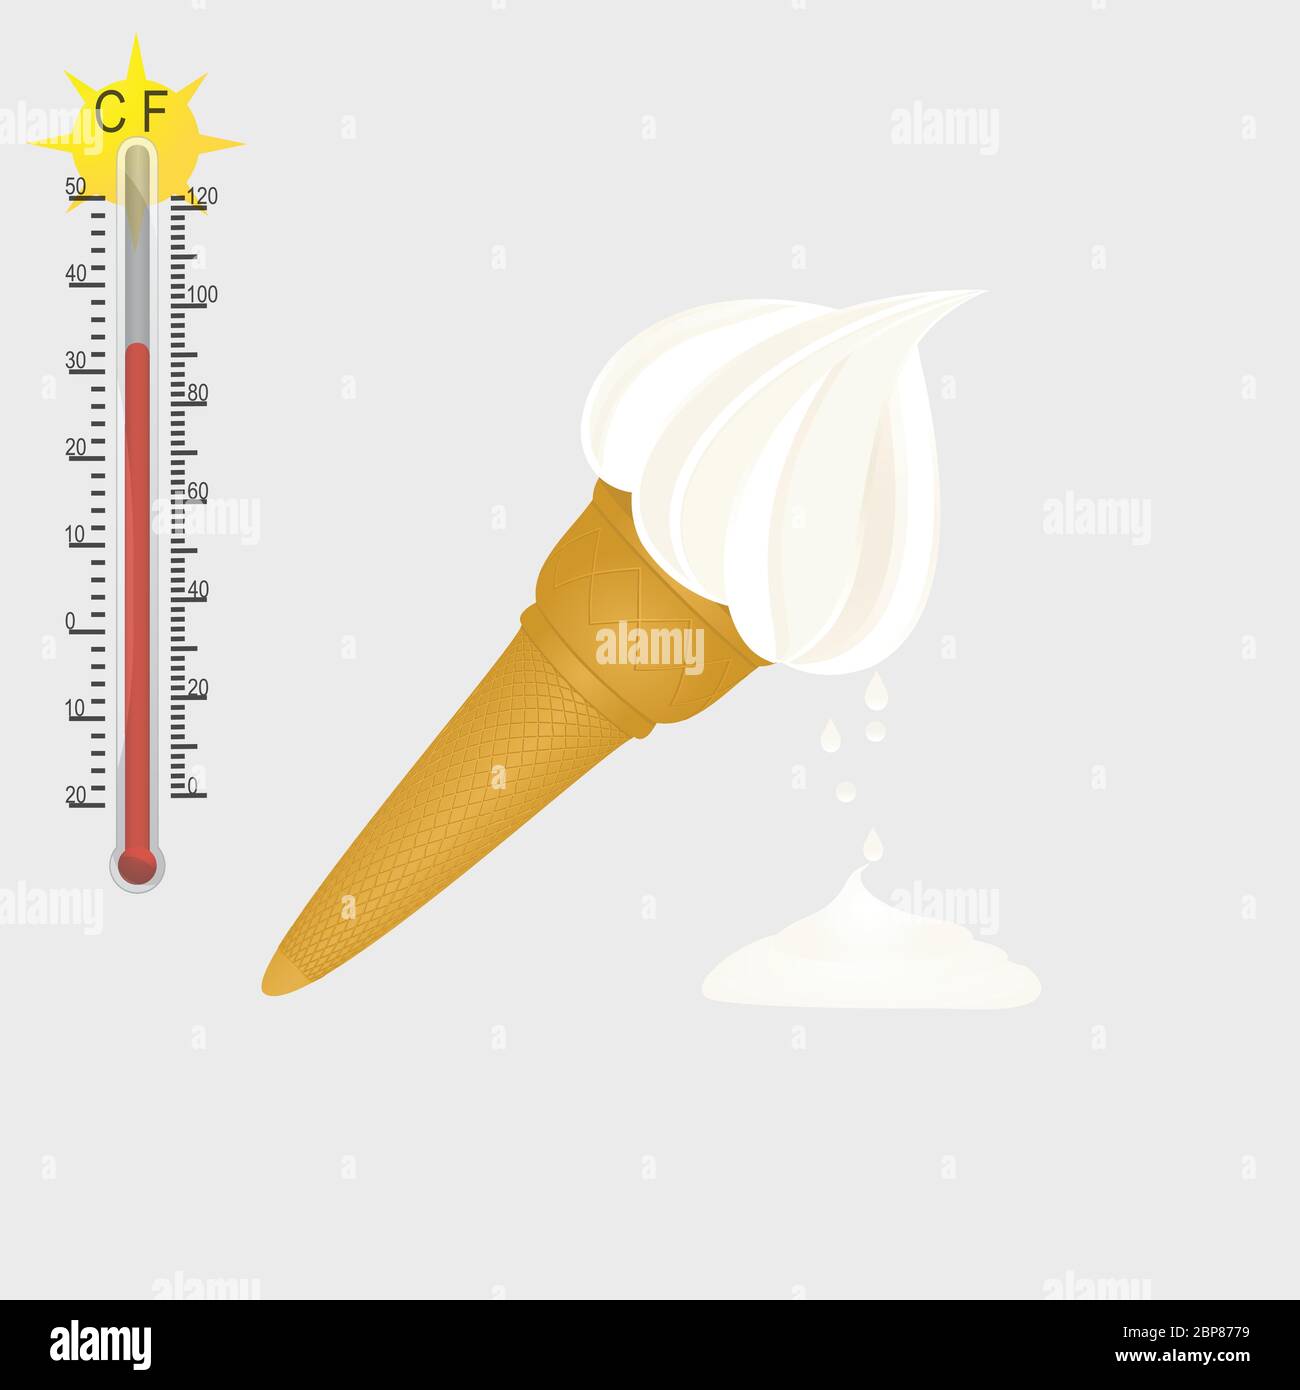 Illustration Of A Vanilla Ice Cream Cone Melting Over White Background With Thermometer Signing 31 Degree Celsius And 91 Degree Fahrenheit Stock Vector